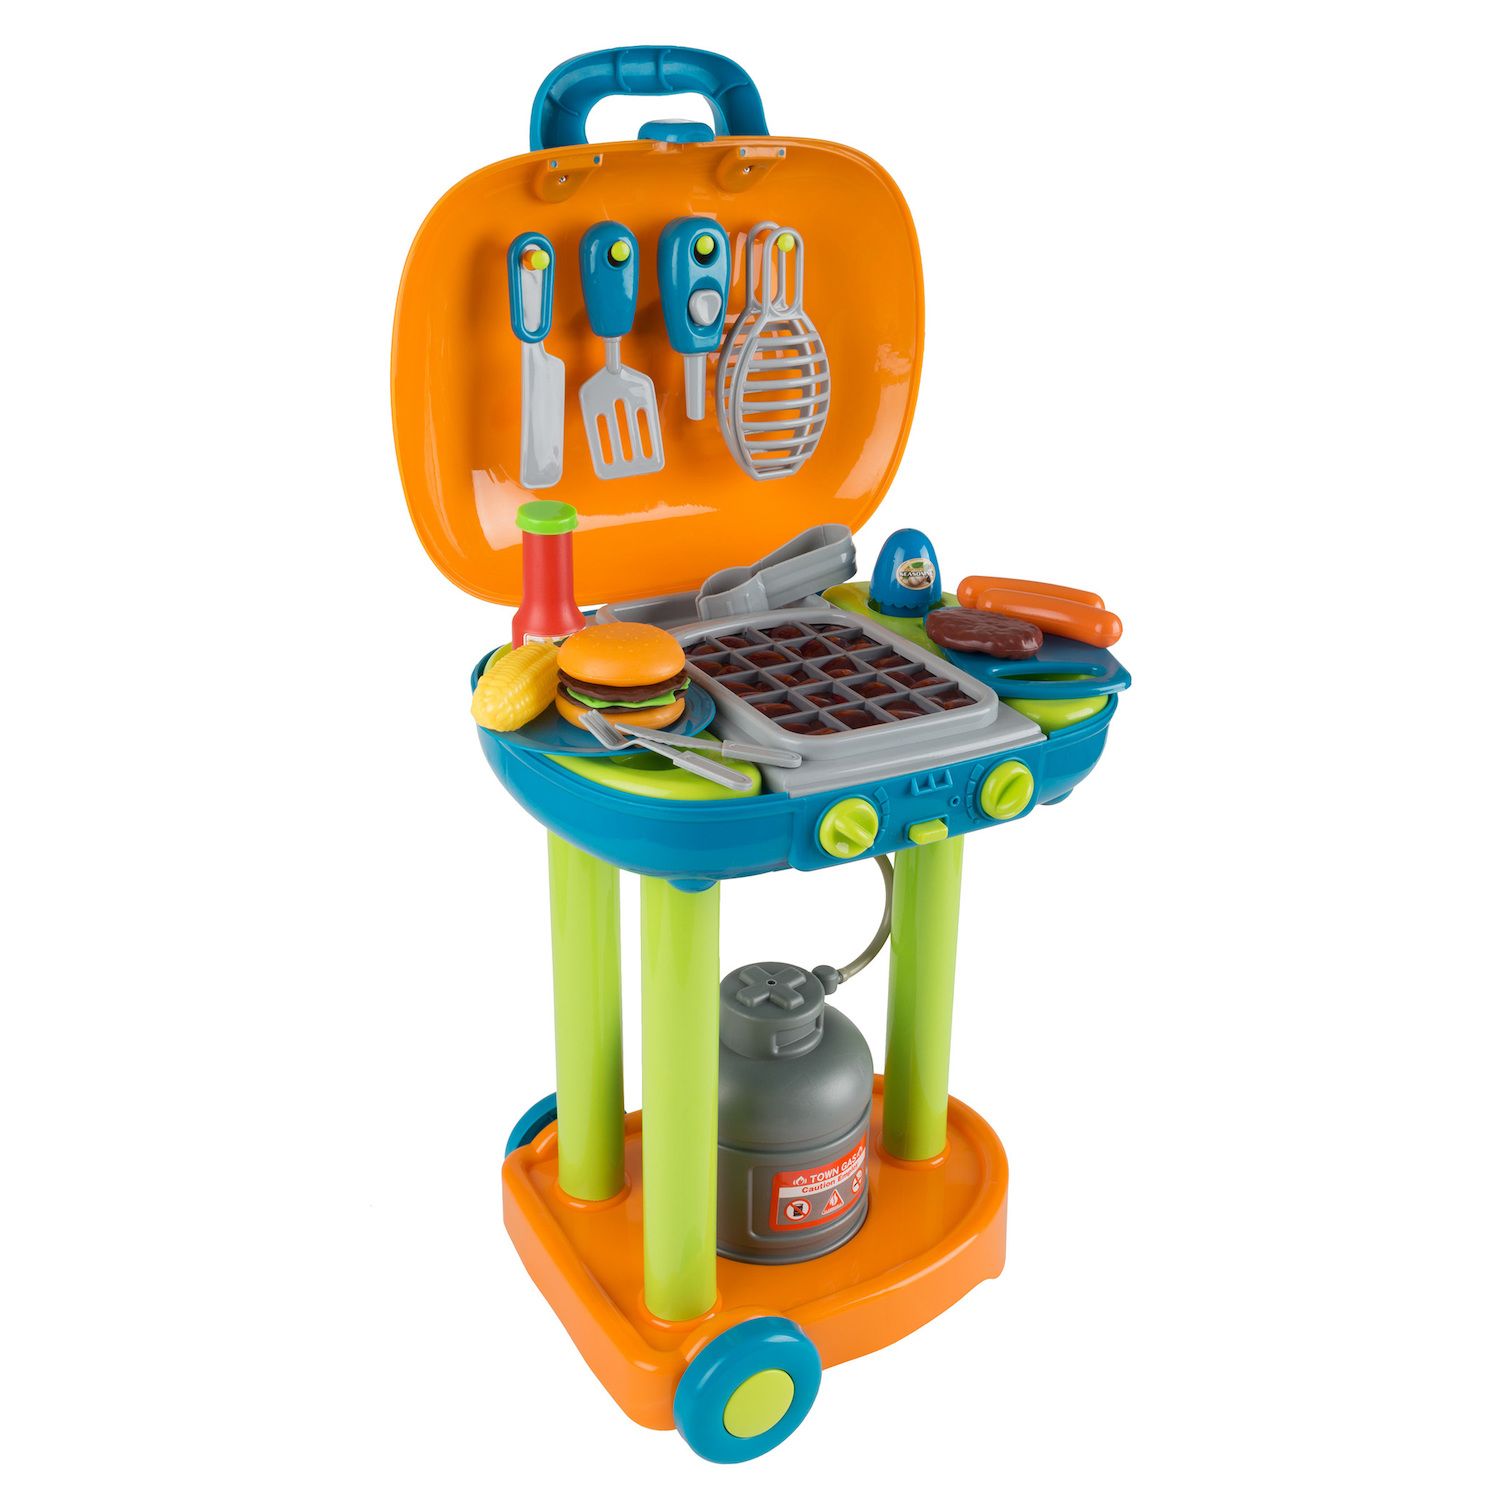 Image for Hey! Play! BBQ Grill Toy Set with Realistic Sounds and Grate Lights at Kohl's.